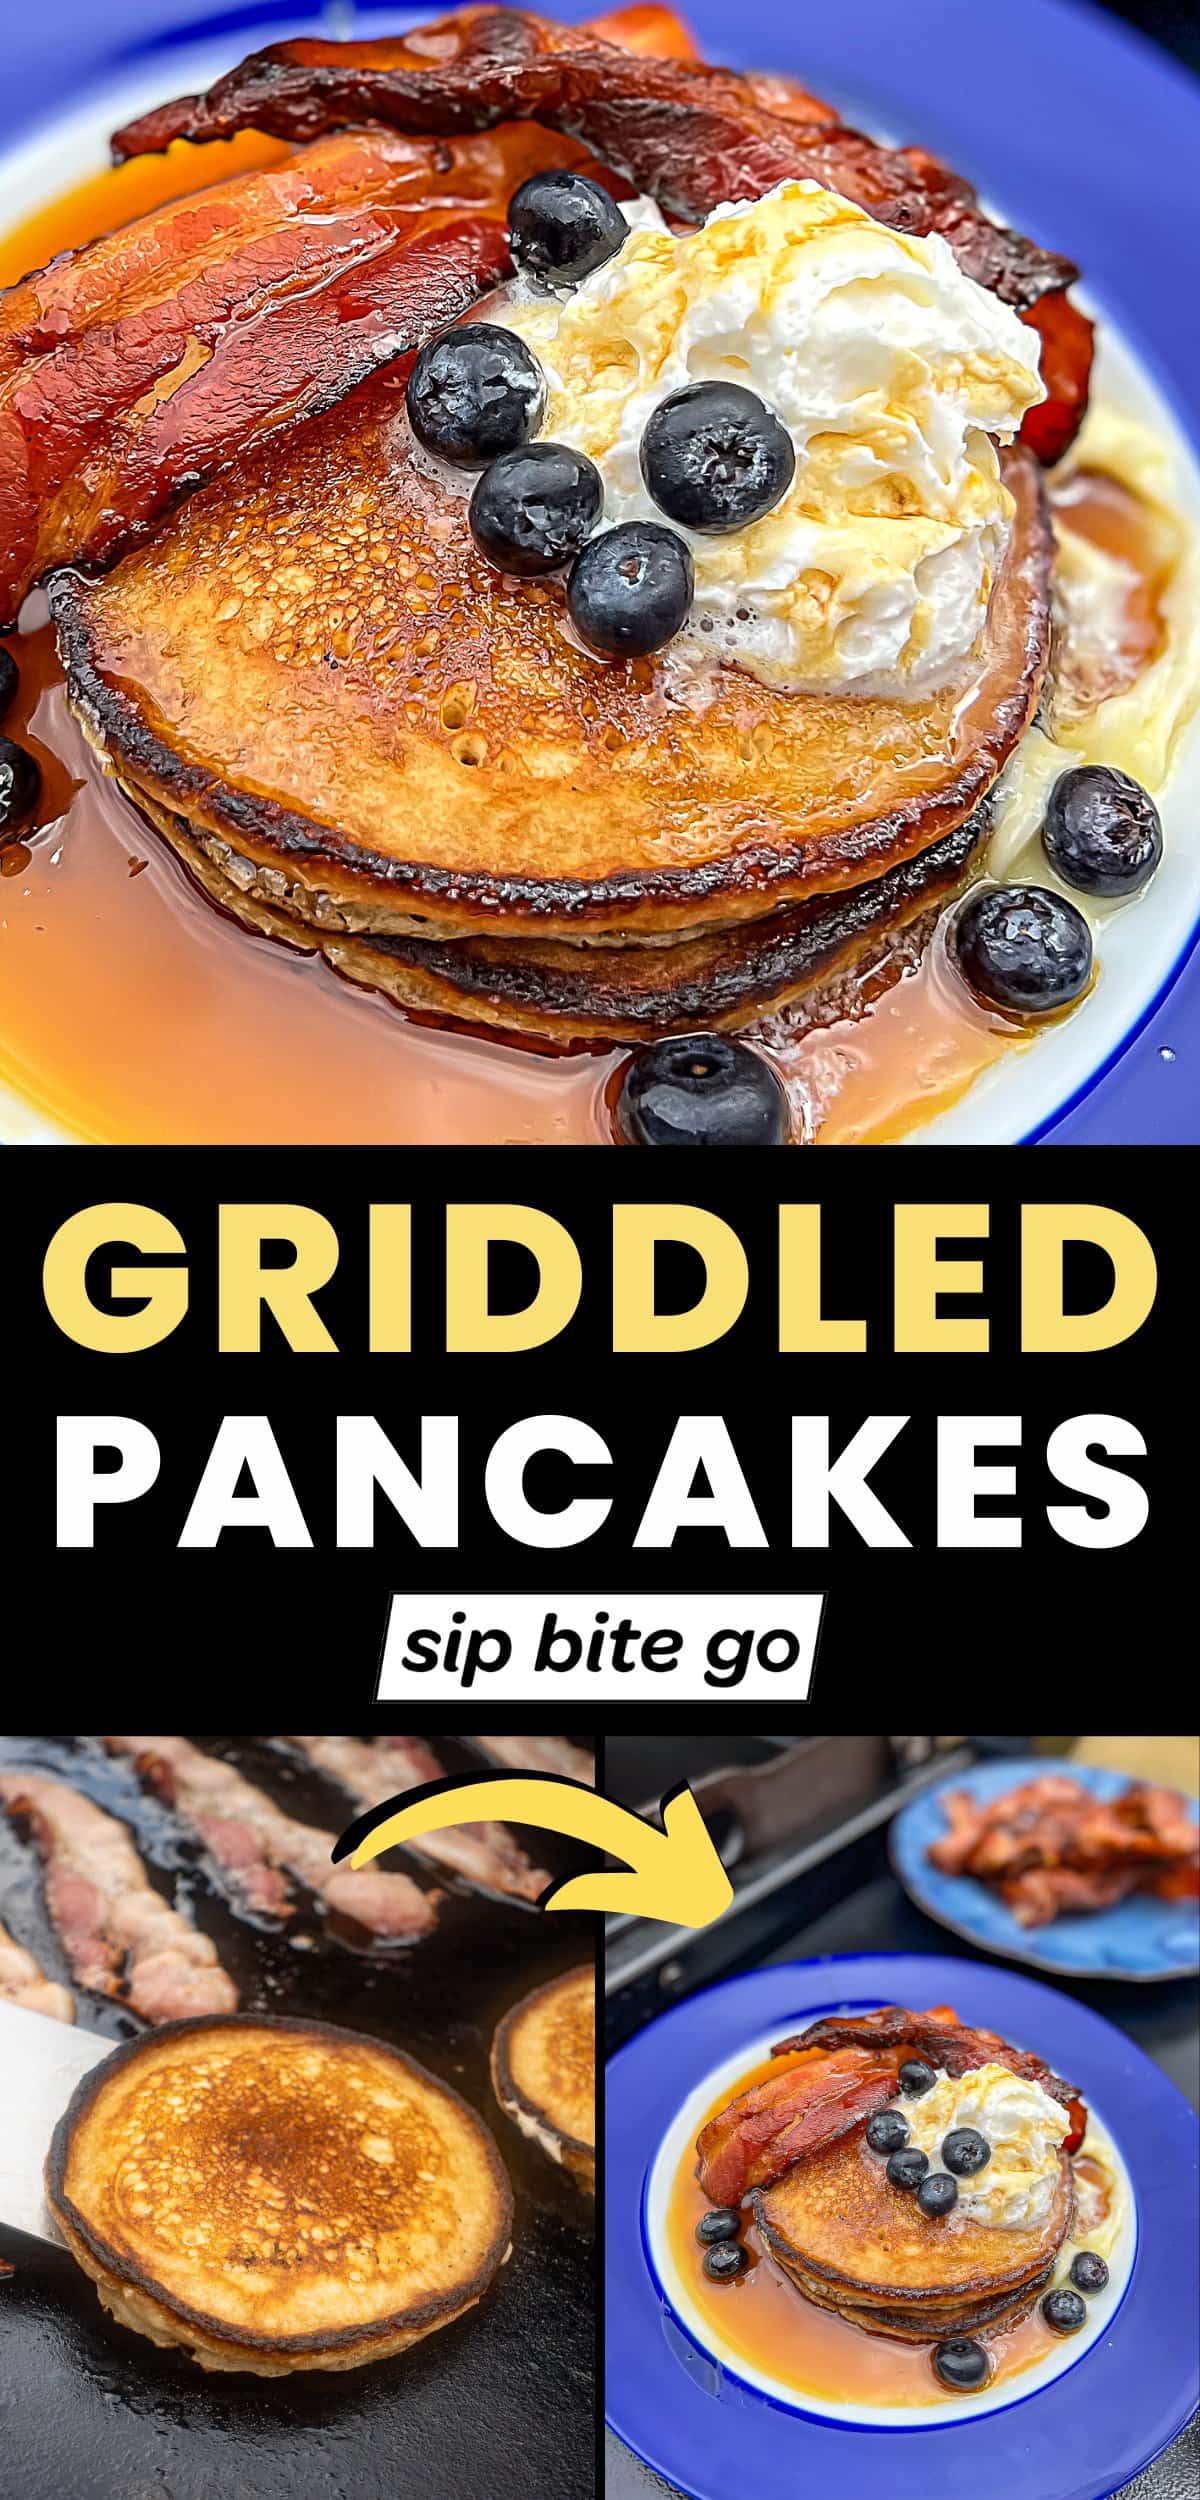 Griddle Pancakes Recipe images with steps and text overlay with Sip Bite Go logo